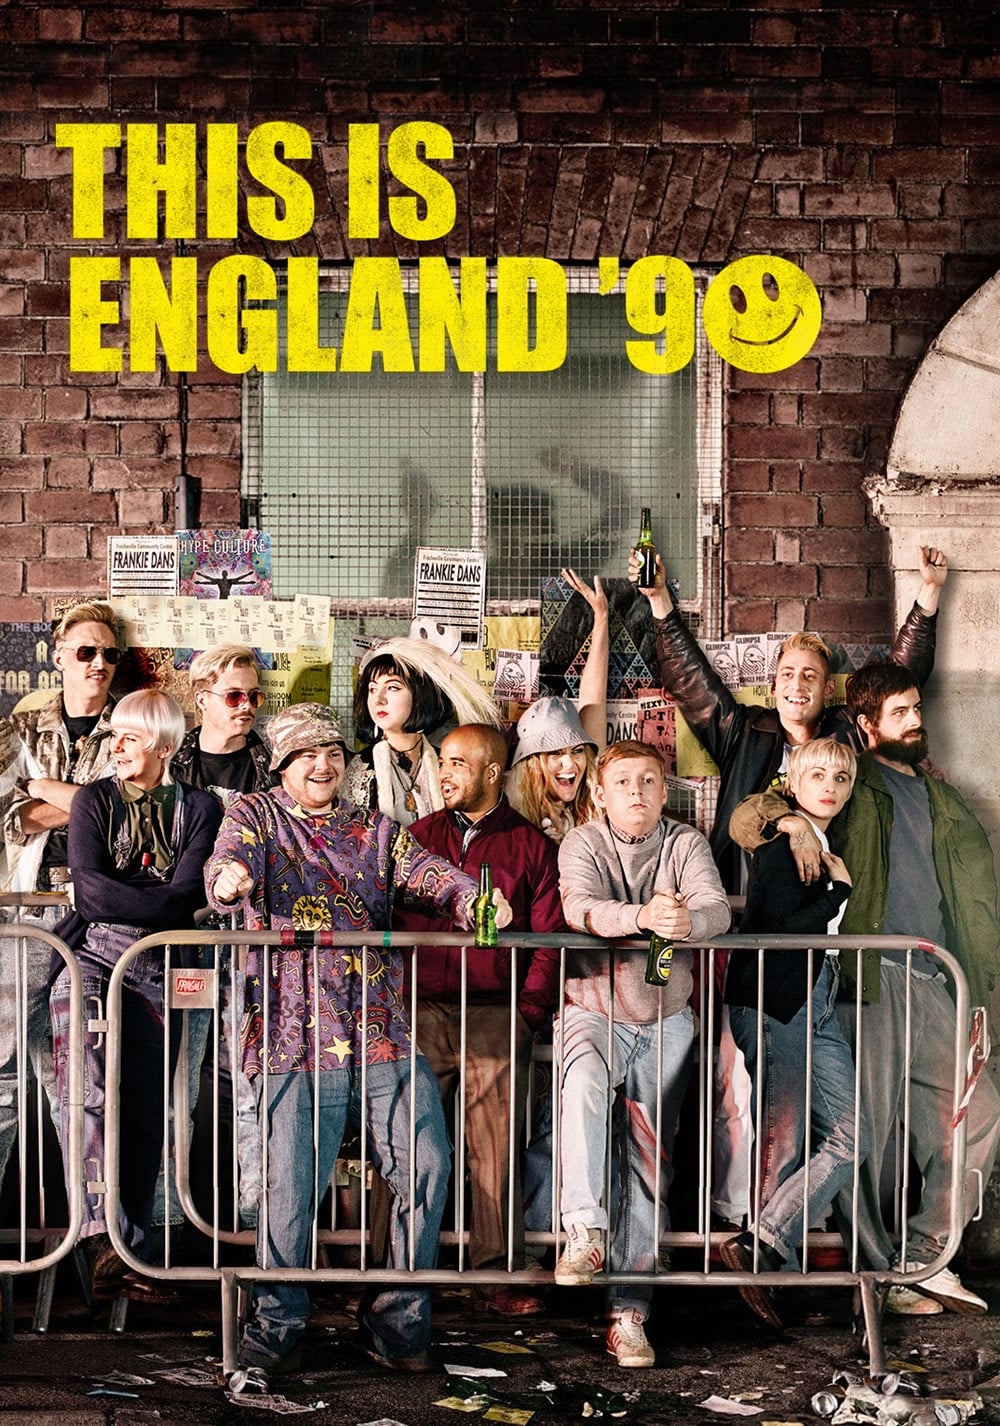 This Is England '90 TV Shows About Rave Culture